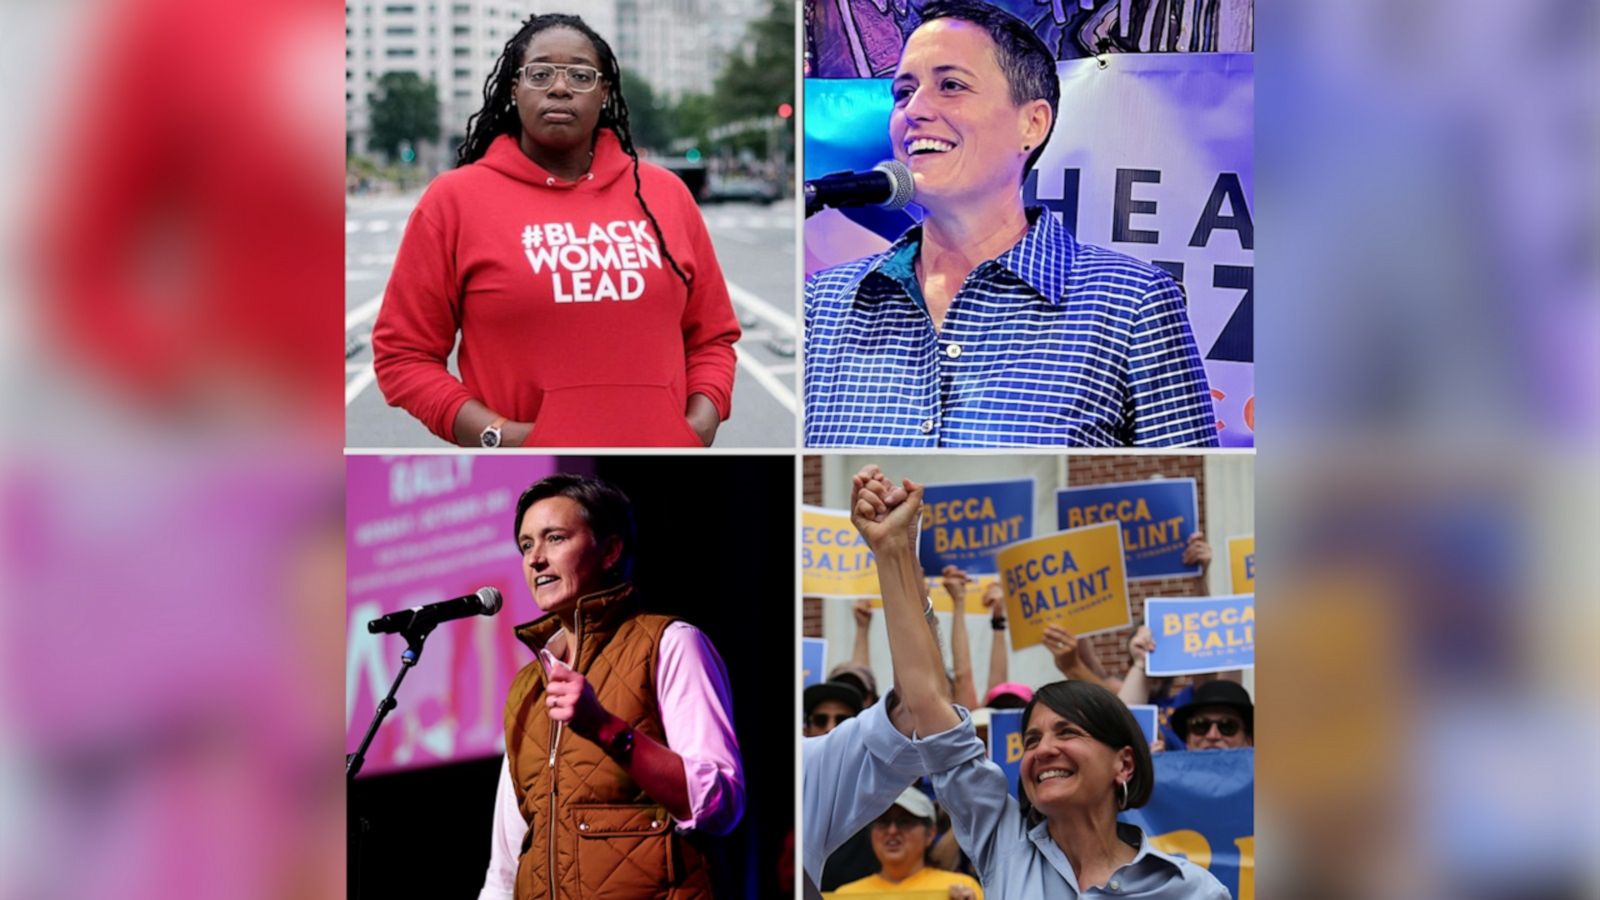 VIDEO: We asked 4 LGBTQ+ candidates for Congress why they’re running